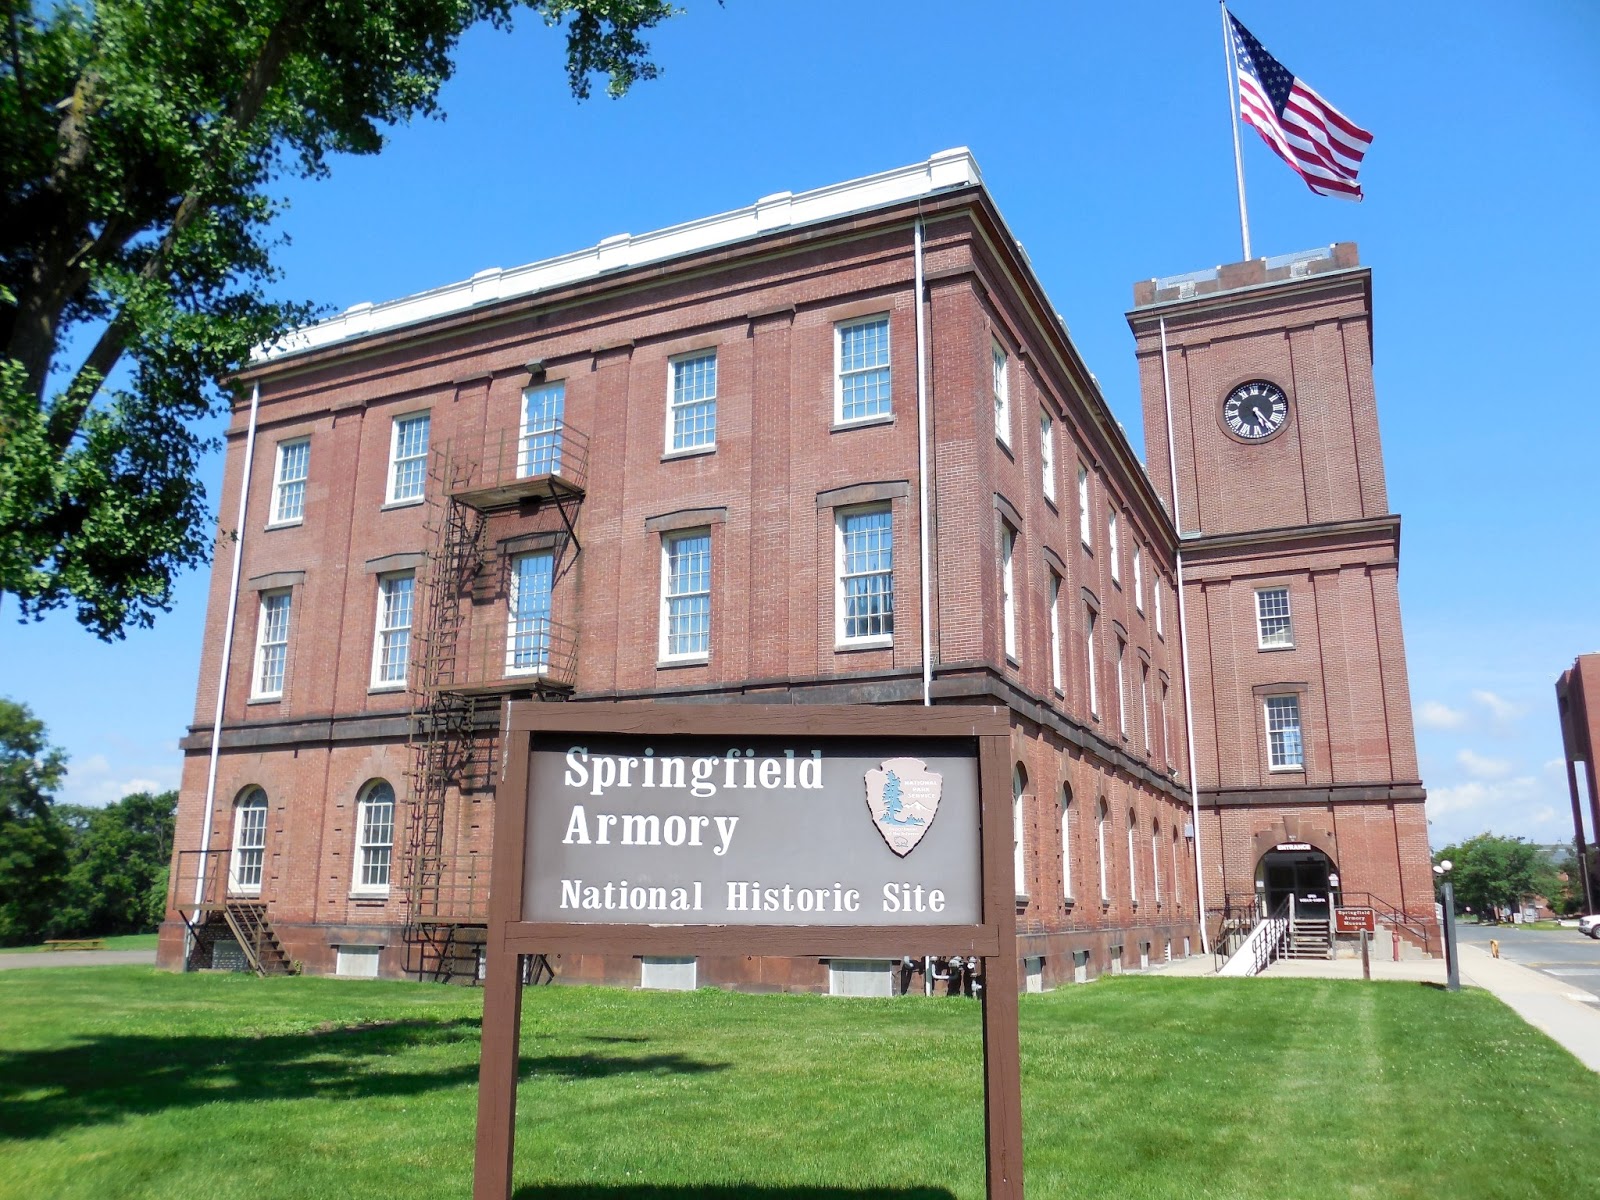 Springfield Armory NHS